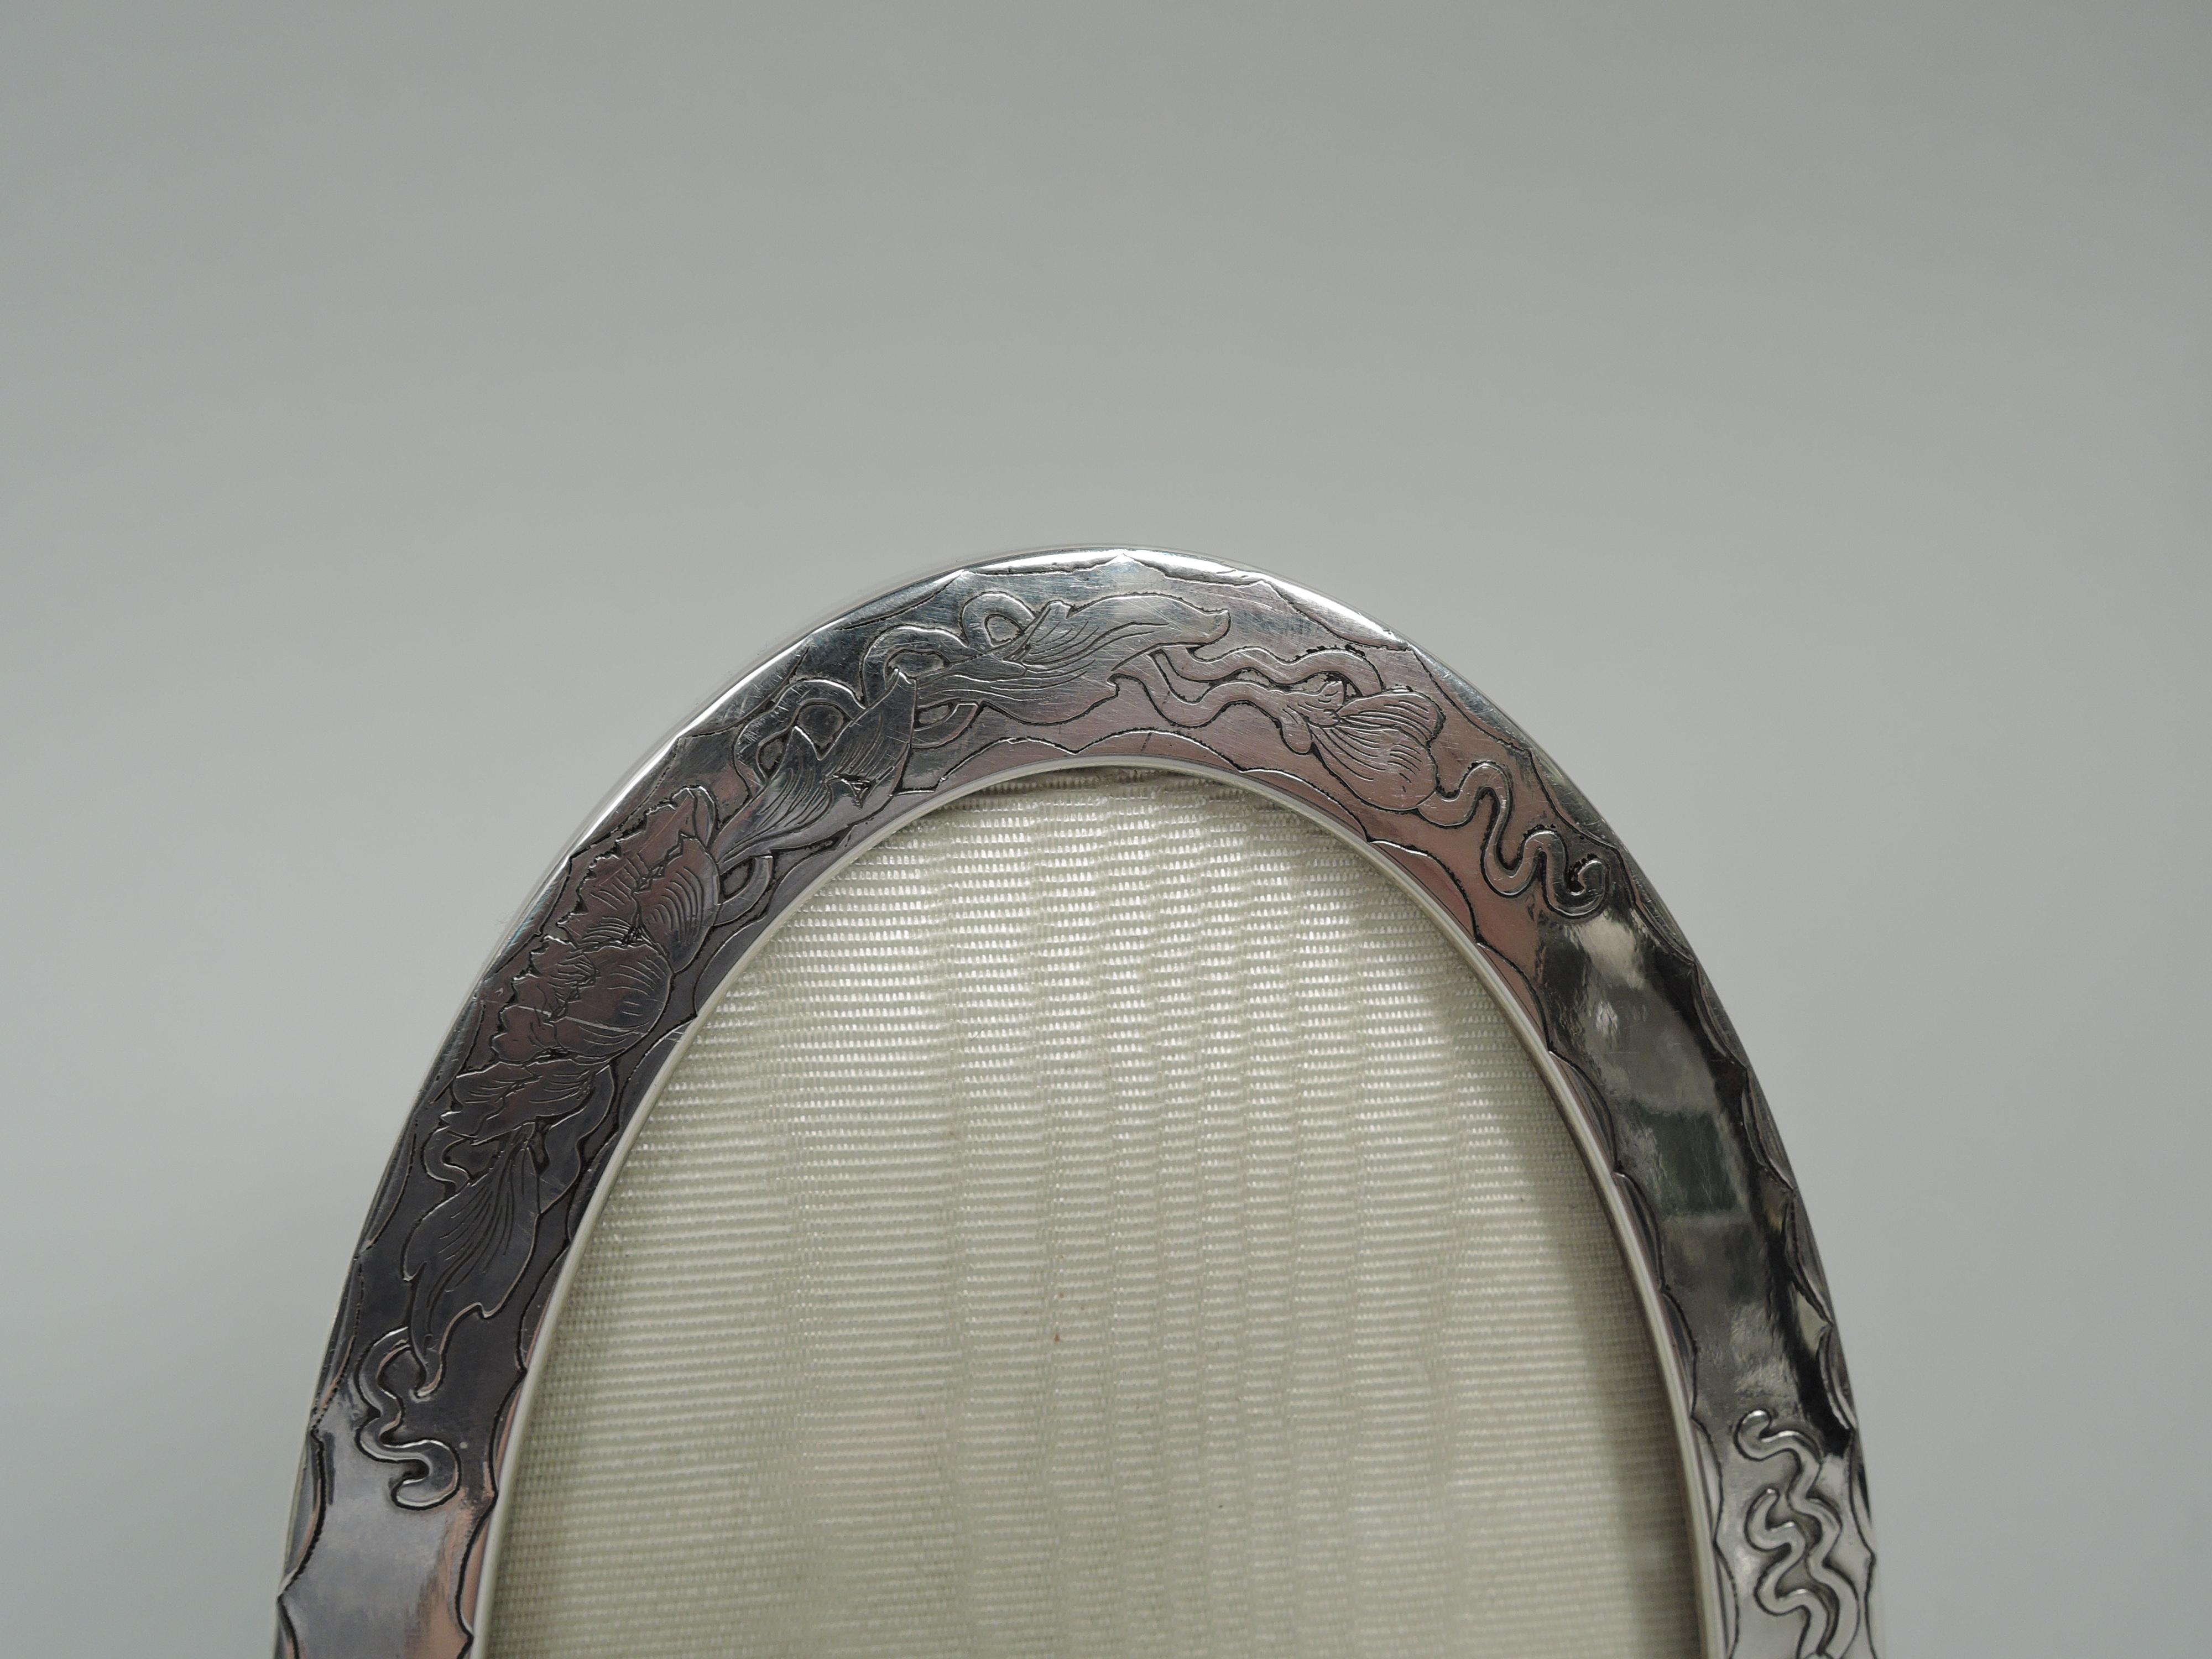 Lovely Art Nouveau sterling silver picture frame. Oval window in same surround. On front acid-etched ornament in form of fluid flower heads and tendrils between scalloped borders; sides plain. Two charming ball supports. With glass, silk lining, and